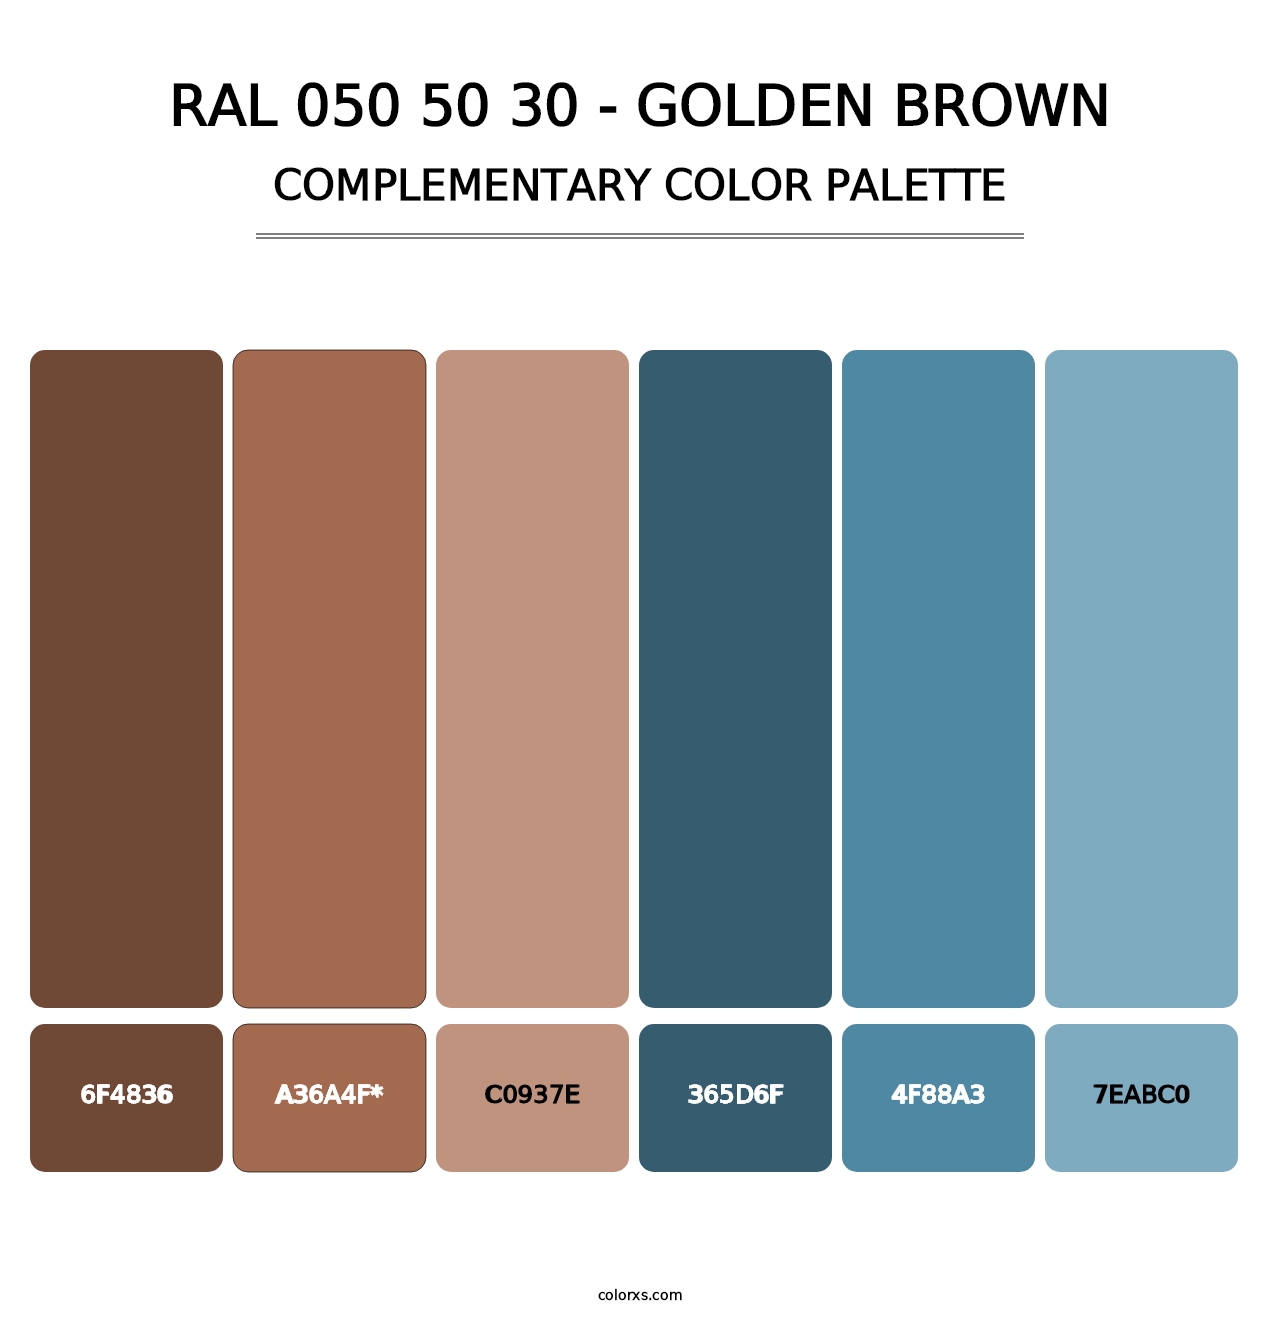 RAL 050 50 30 - Golden Brown - Complementary Color Palette